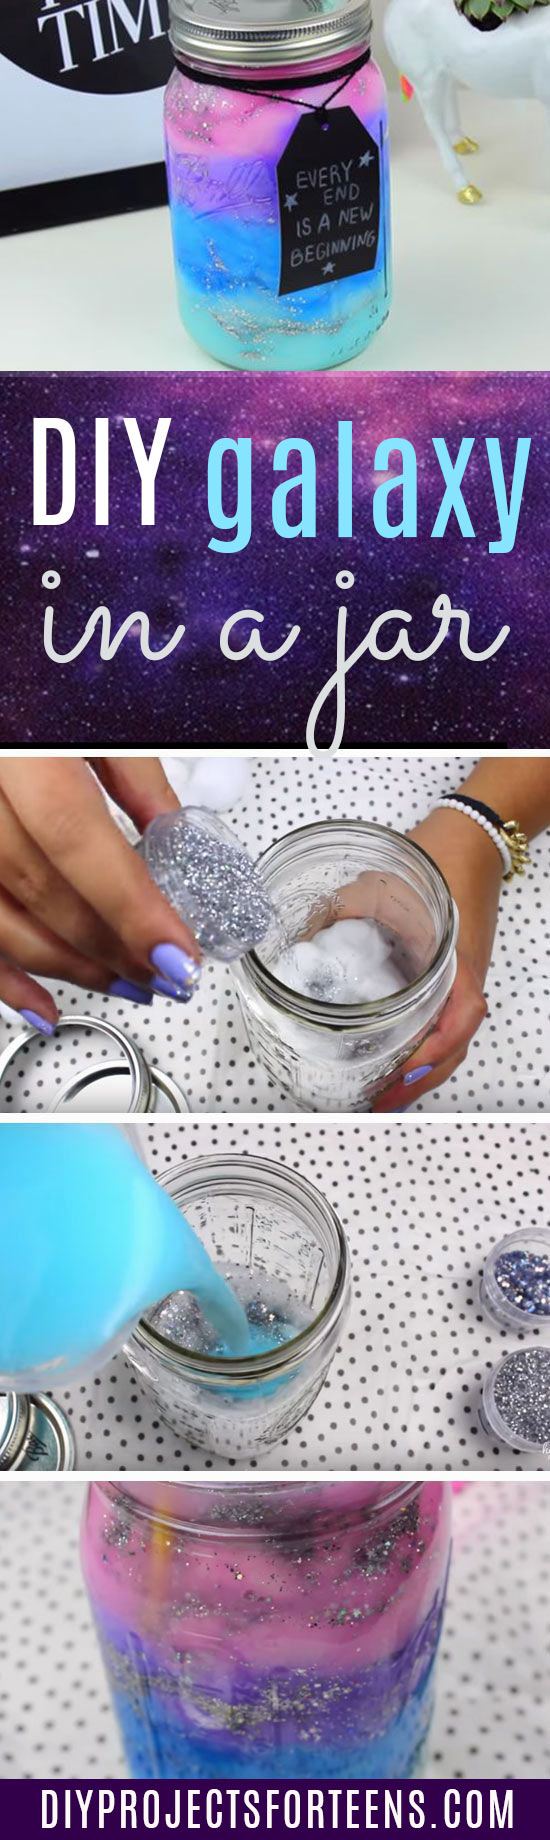 DIY Galaxy Crafts - DIY Galaxy in A Jar Bottled Nebula - Galaxy DIY Projects for Your Room, Gifts, Clothes. Ideas for Painting Jewelry, Shirts, Jar Ideas, Food and Makeup. Step by Step Tutorials for Teens, Tweens and Adults